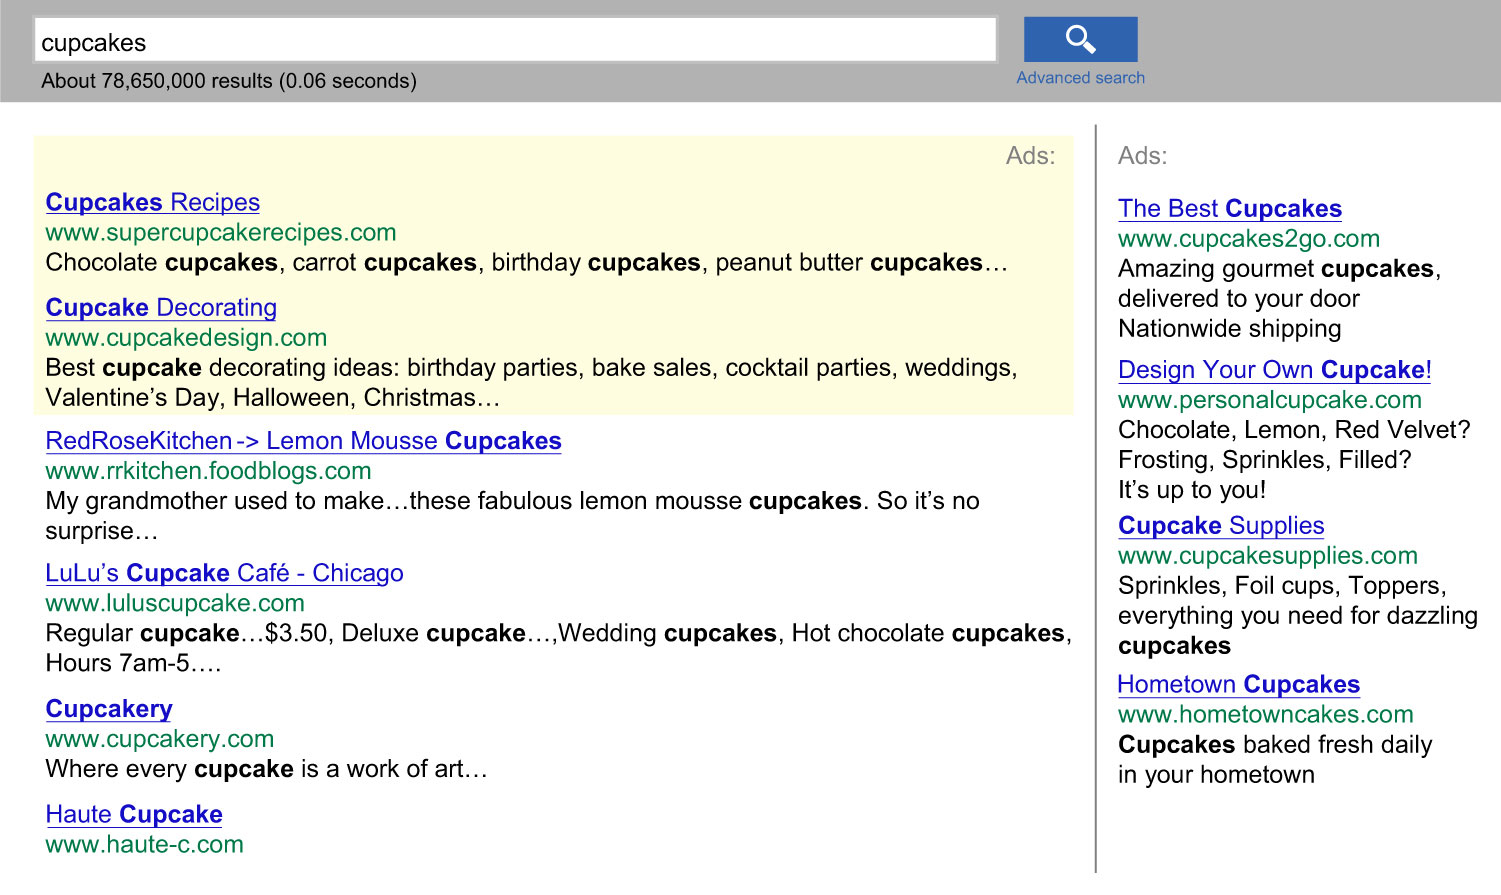 Screenshot of an internet search with sponsored advertisements at the top